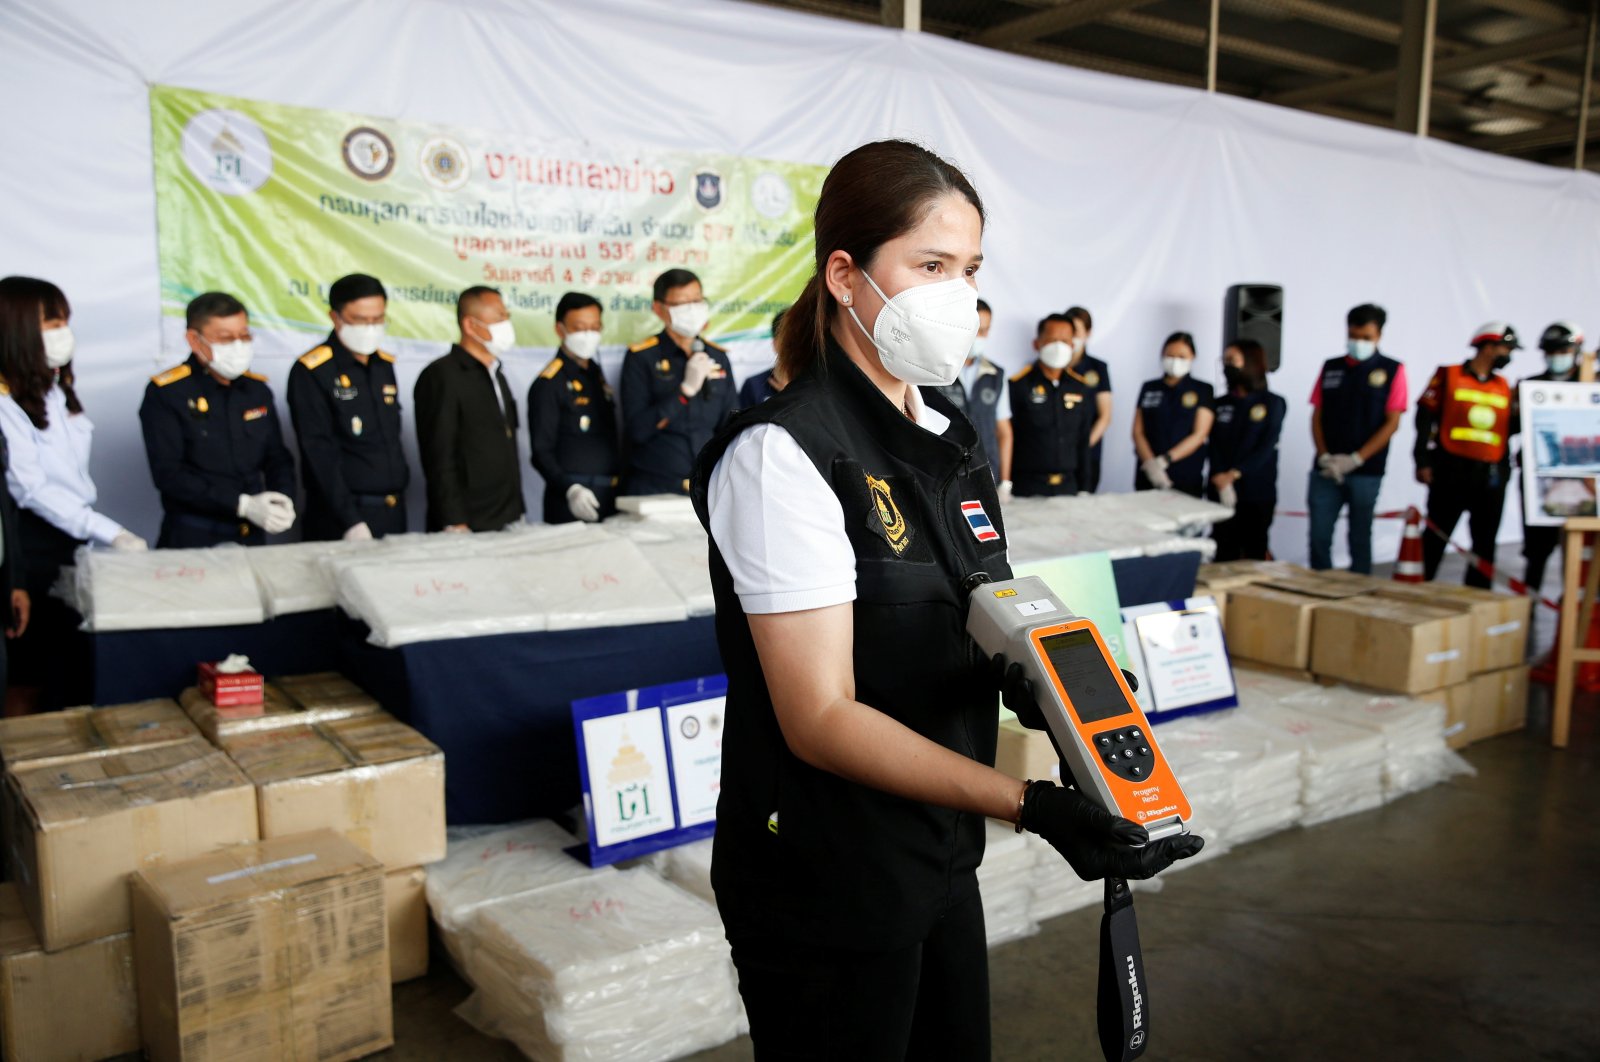 Thai authorities show the result of machine test as they seized 897 kilograms of crystal methamphetamine worth 2.7 billion baht ($79,733,079) after Thai customs intercepted packages headed for Taiwan, in Bangkok, Thailand, Dec. 4, 2021. (Reuters Photo)